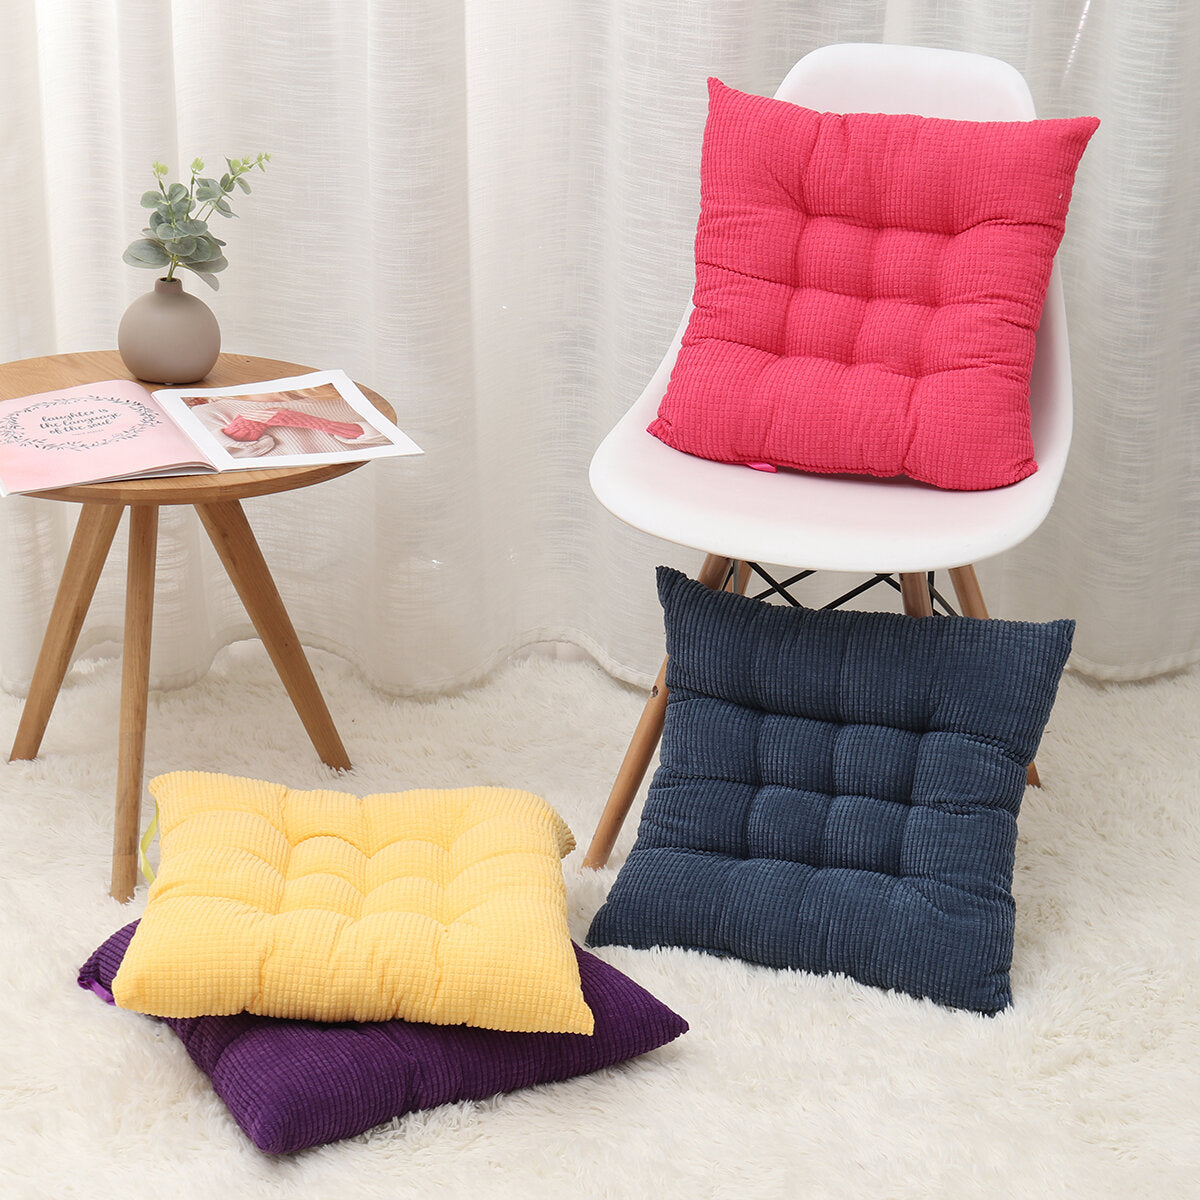 Chair Seat Cushion Square Tatami Dining Chair Mat Buttocks Pillow Chair Car Sofa Soft Seat Pad Home Office Decorations